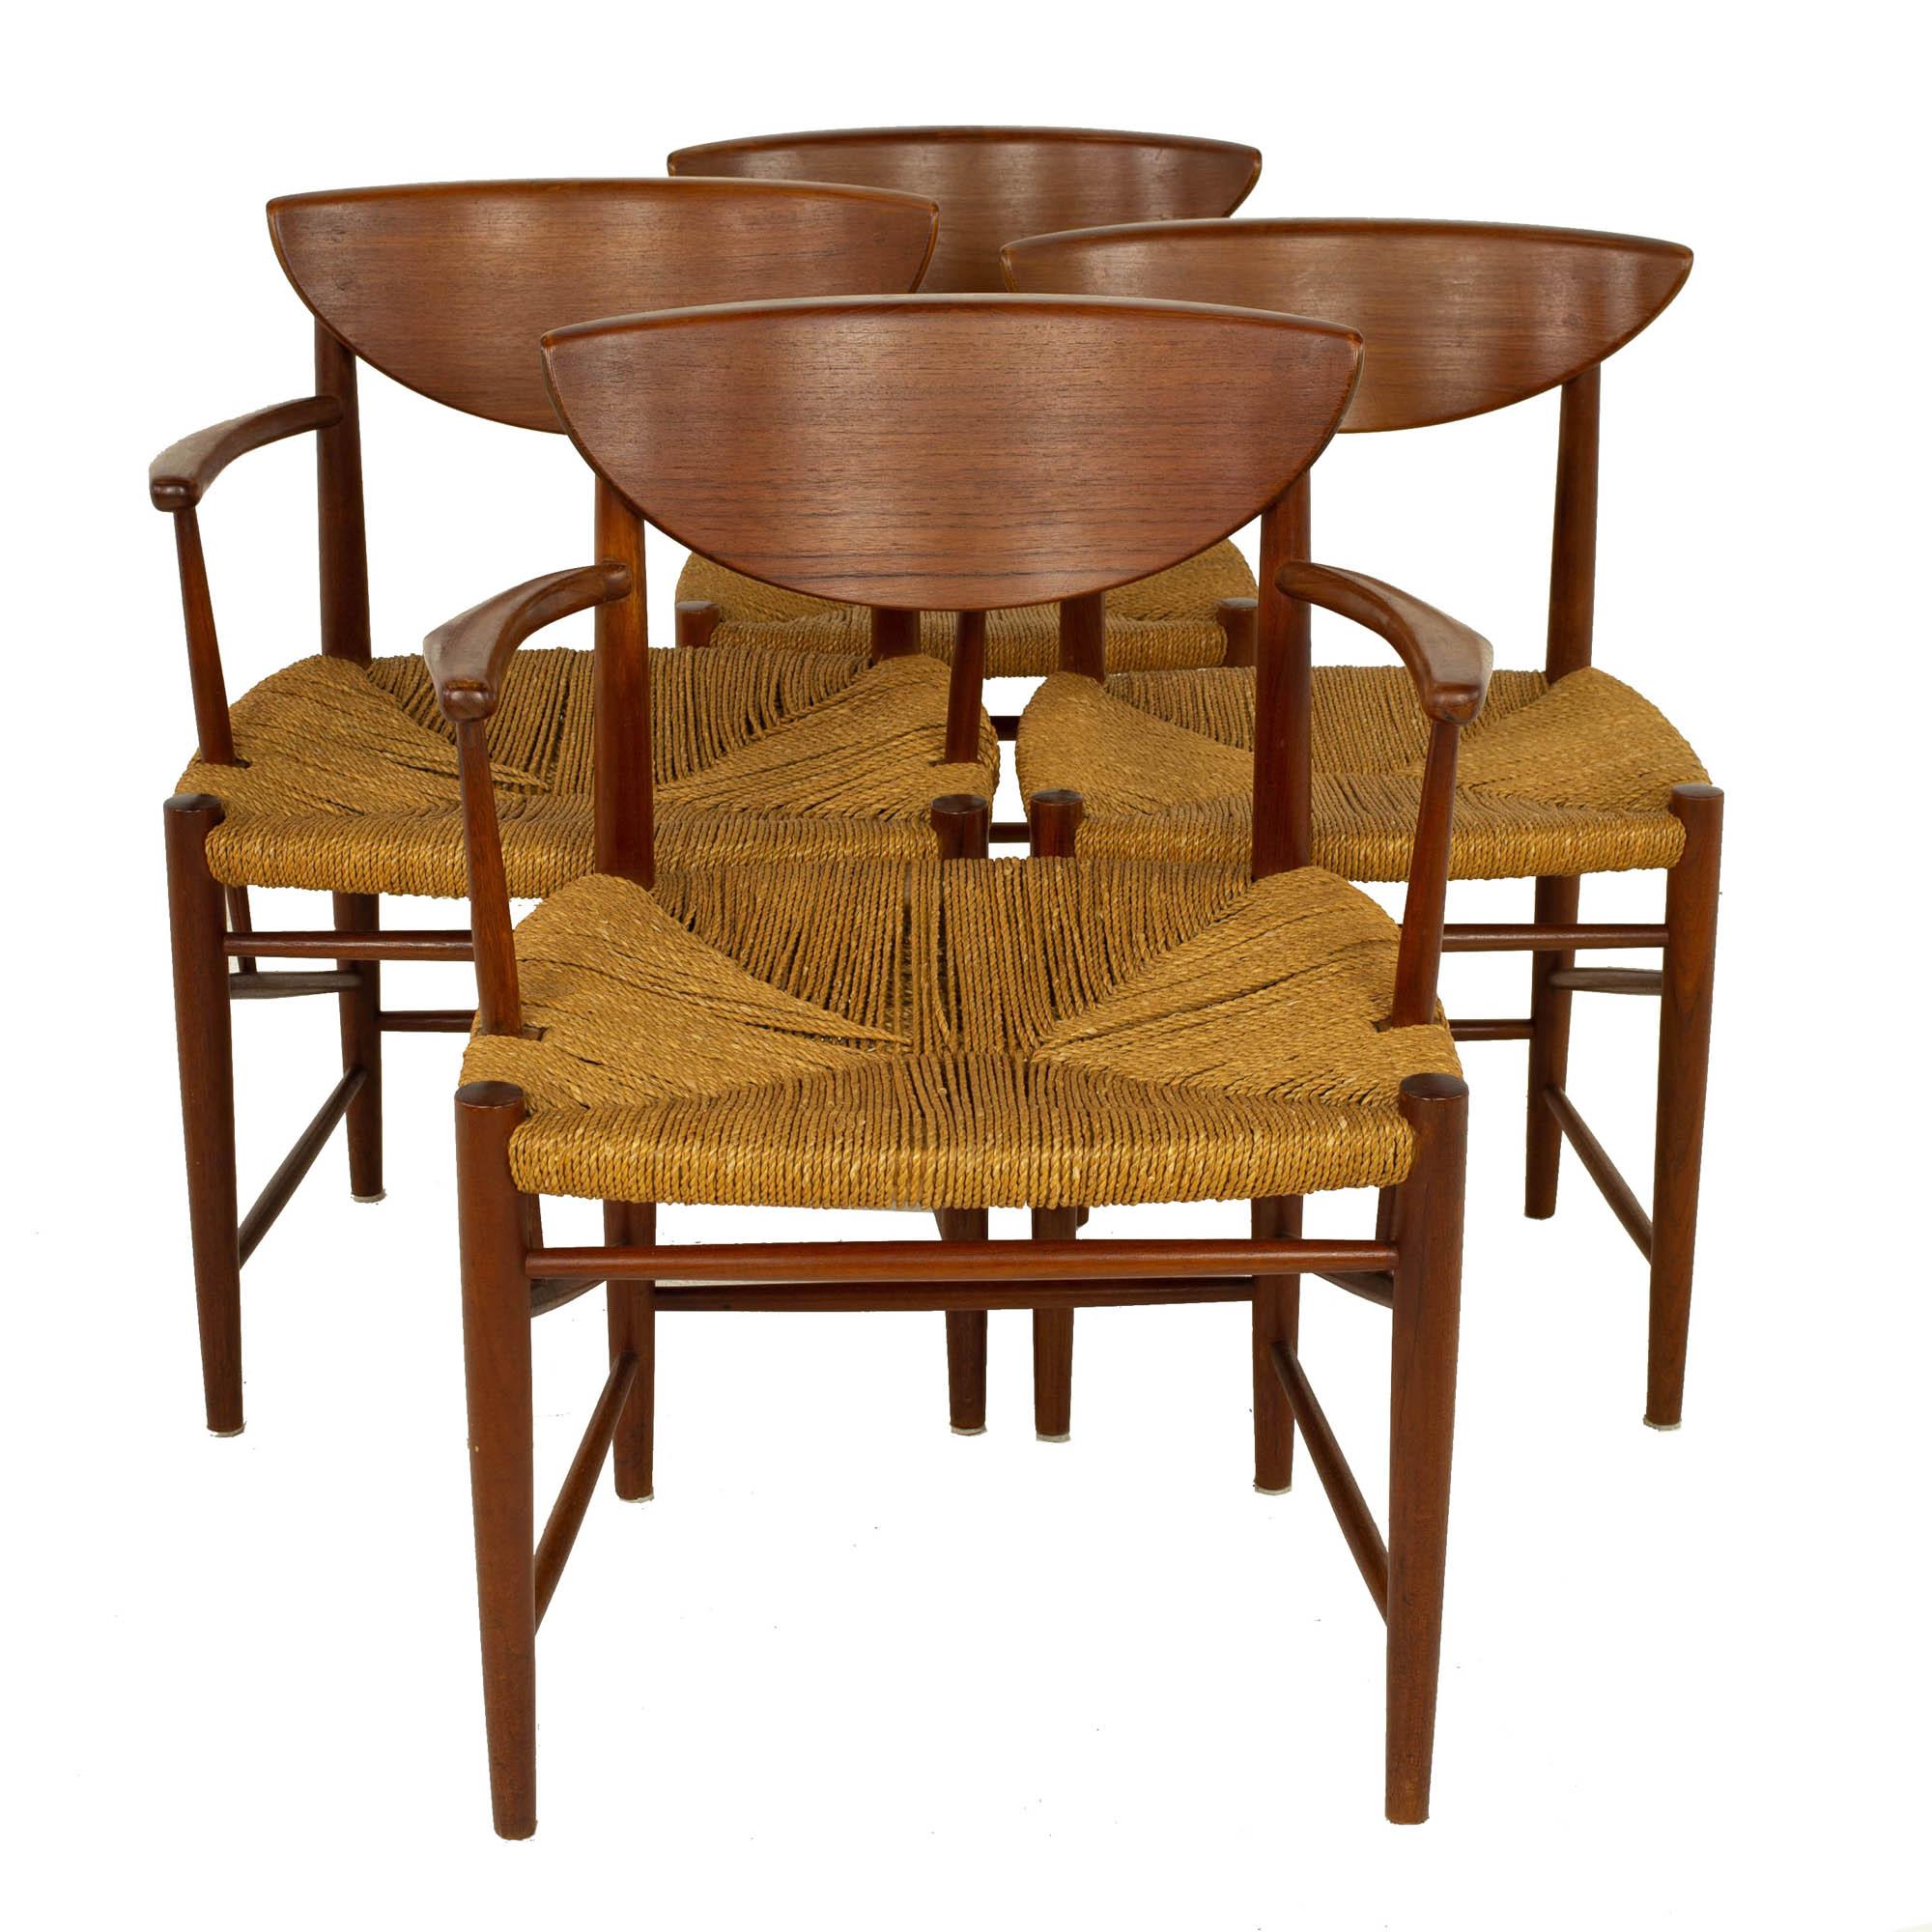 Peter Hvidt Orla Mølgaard Nielsen Model 316 for Soborg MCM Teak Dining Chairs 6 In Good Condition In Countryside, IL